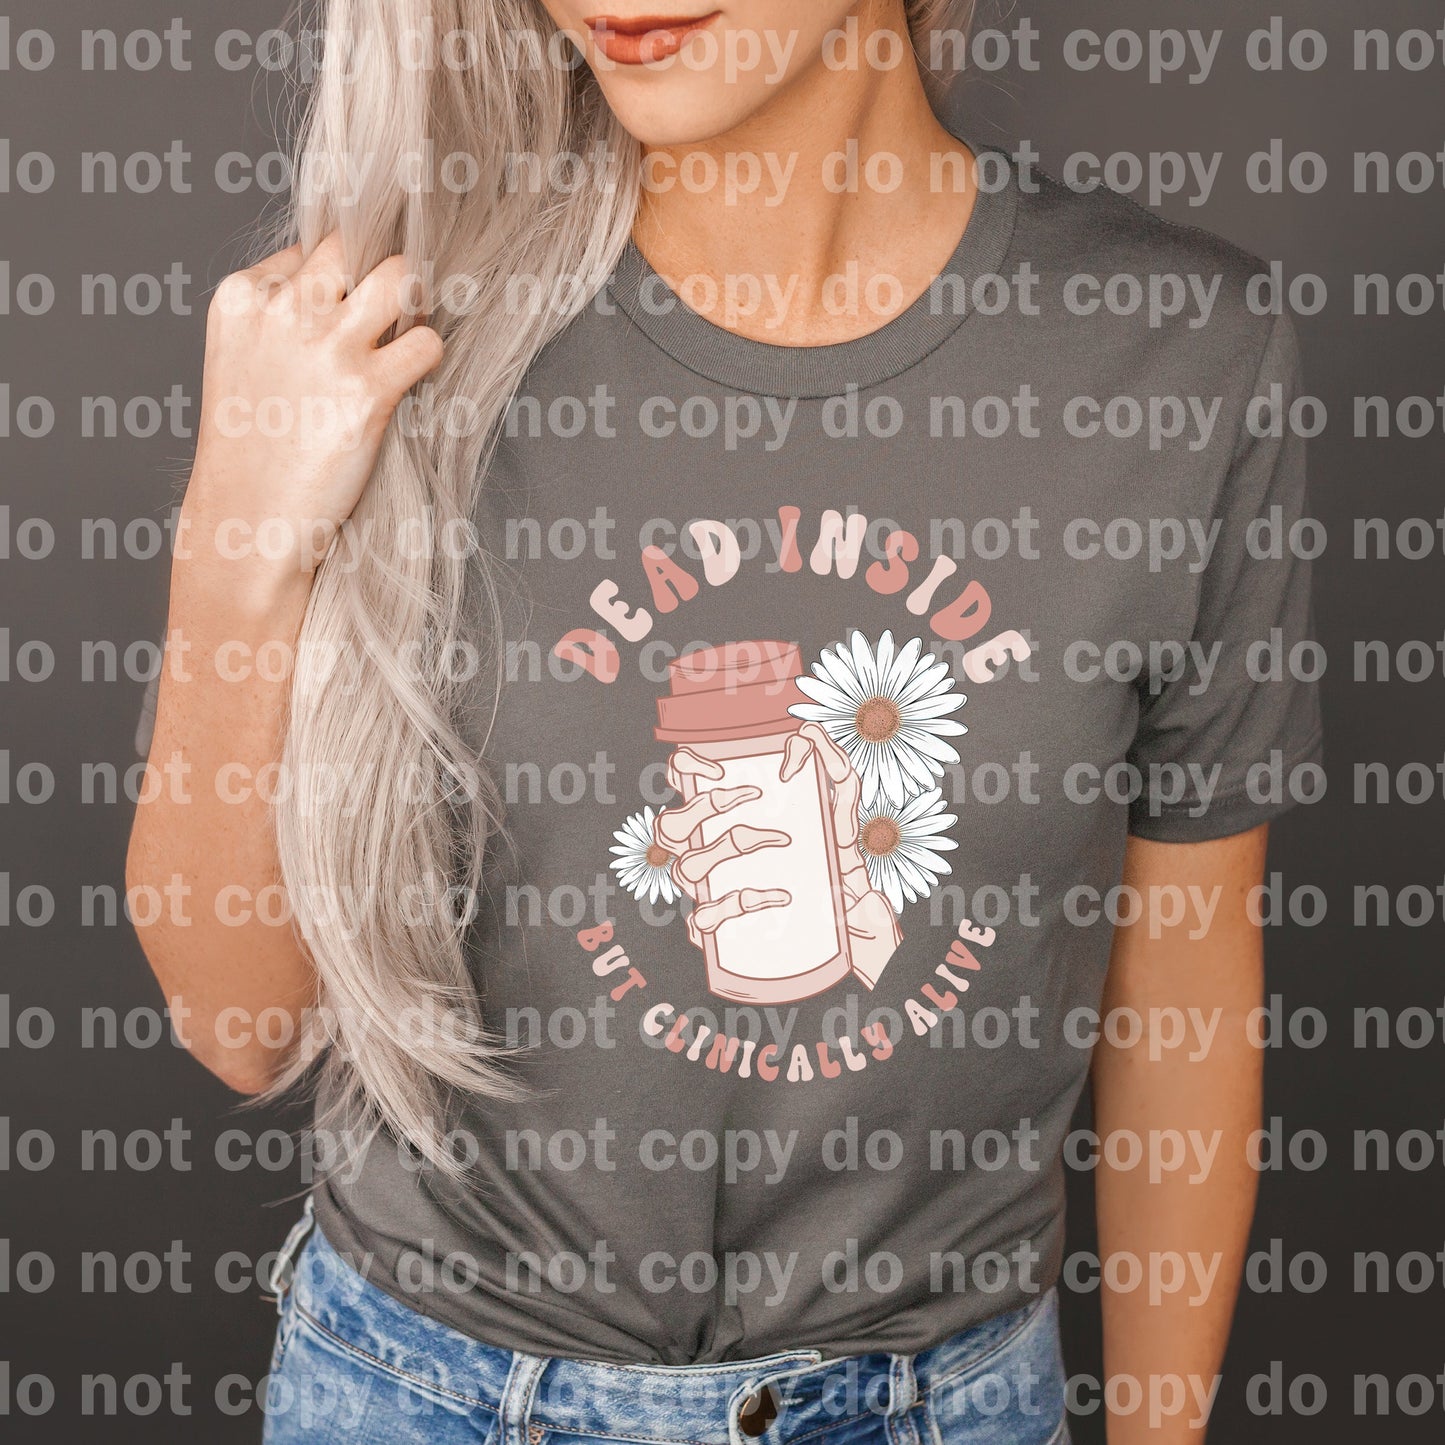 Dead Inside But Clinically Alive Full Color/One Color Dream Print or Sublimation Print